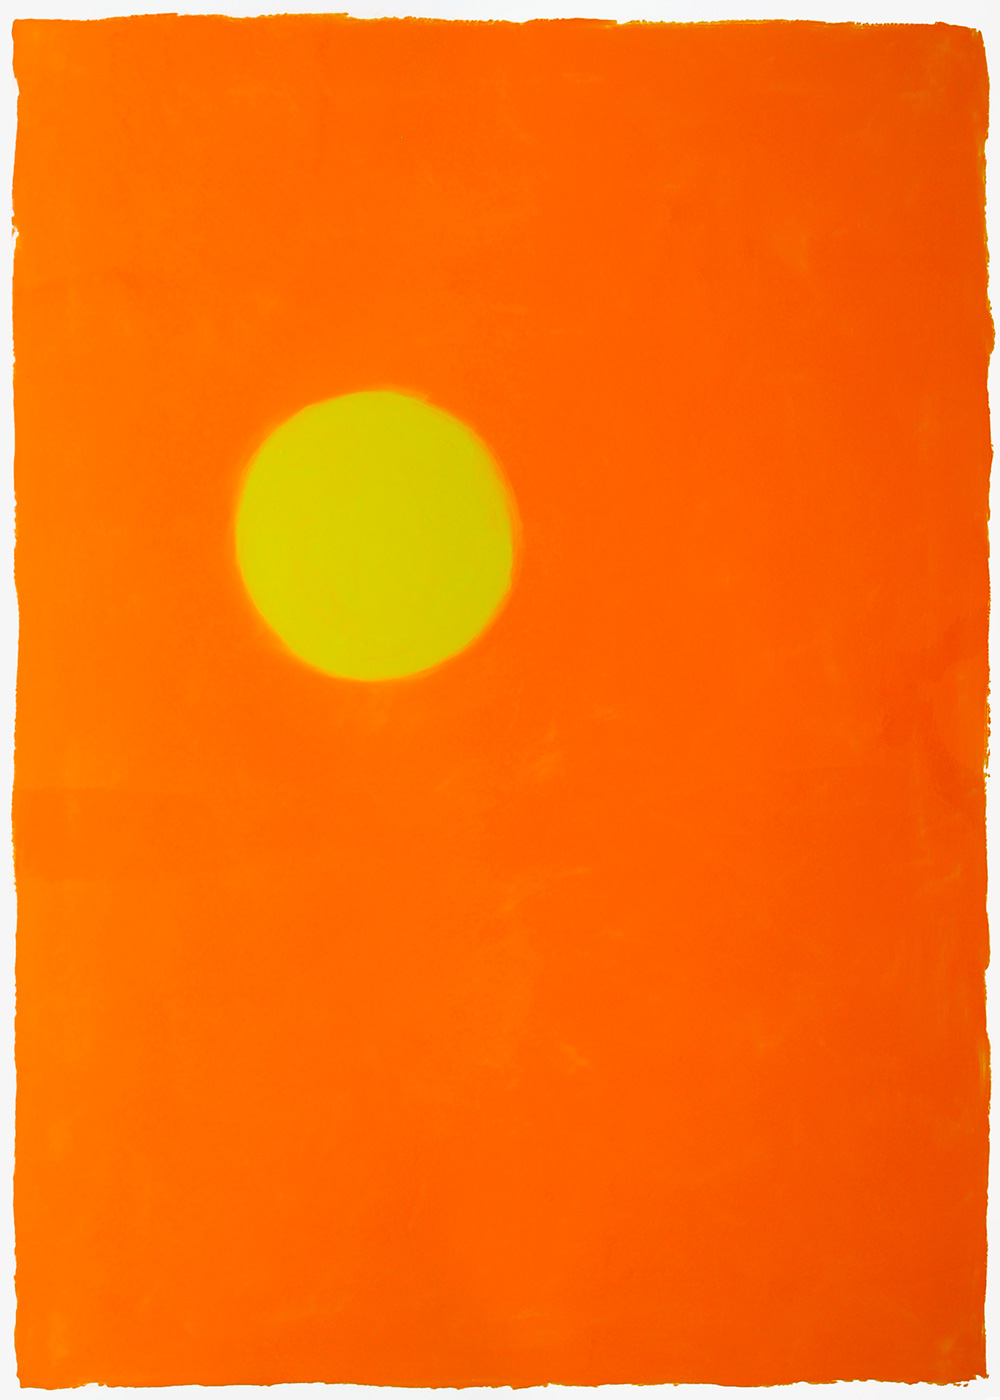 Sunrice, a painting by Guido Vrolix